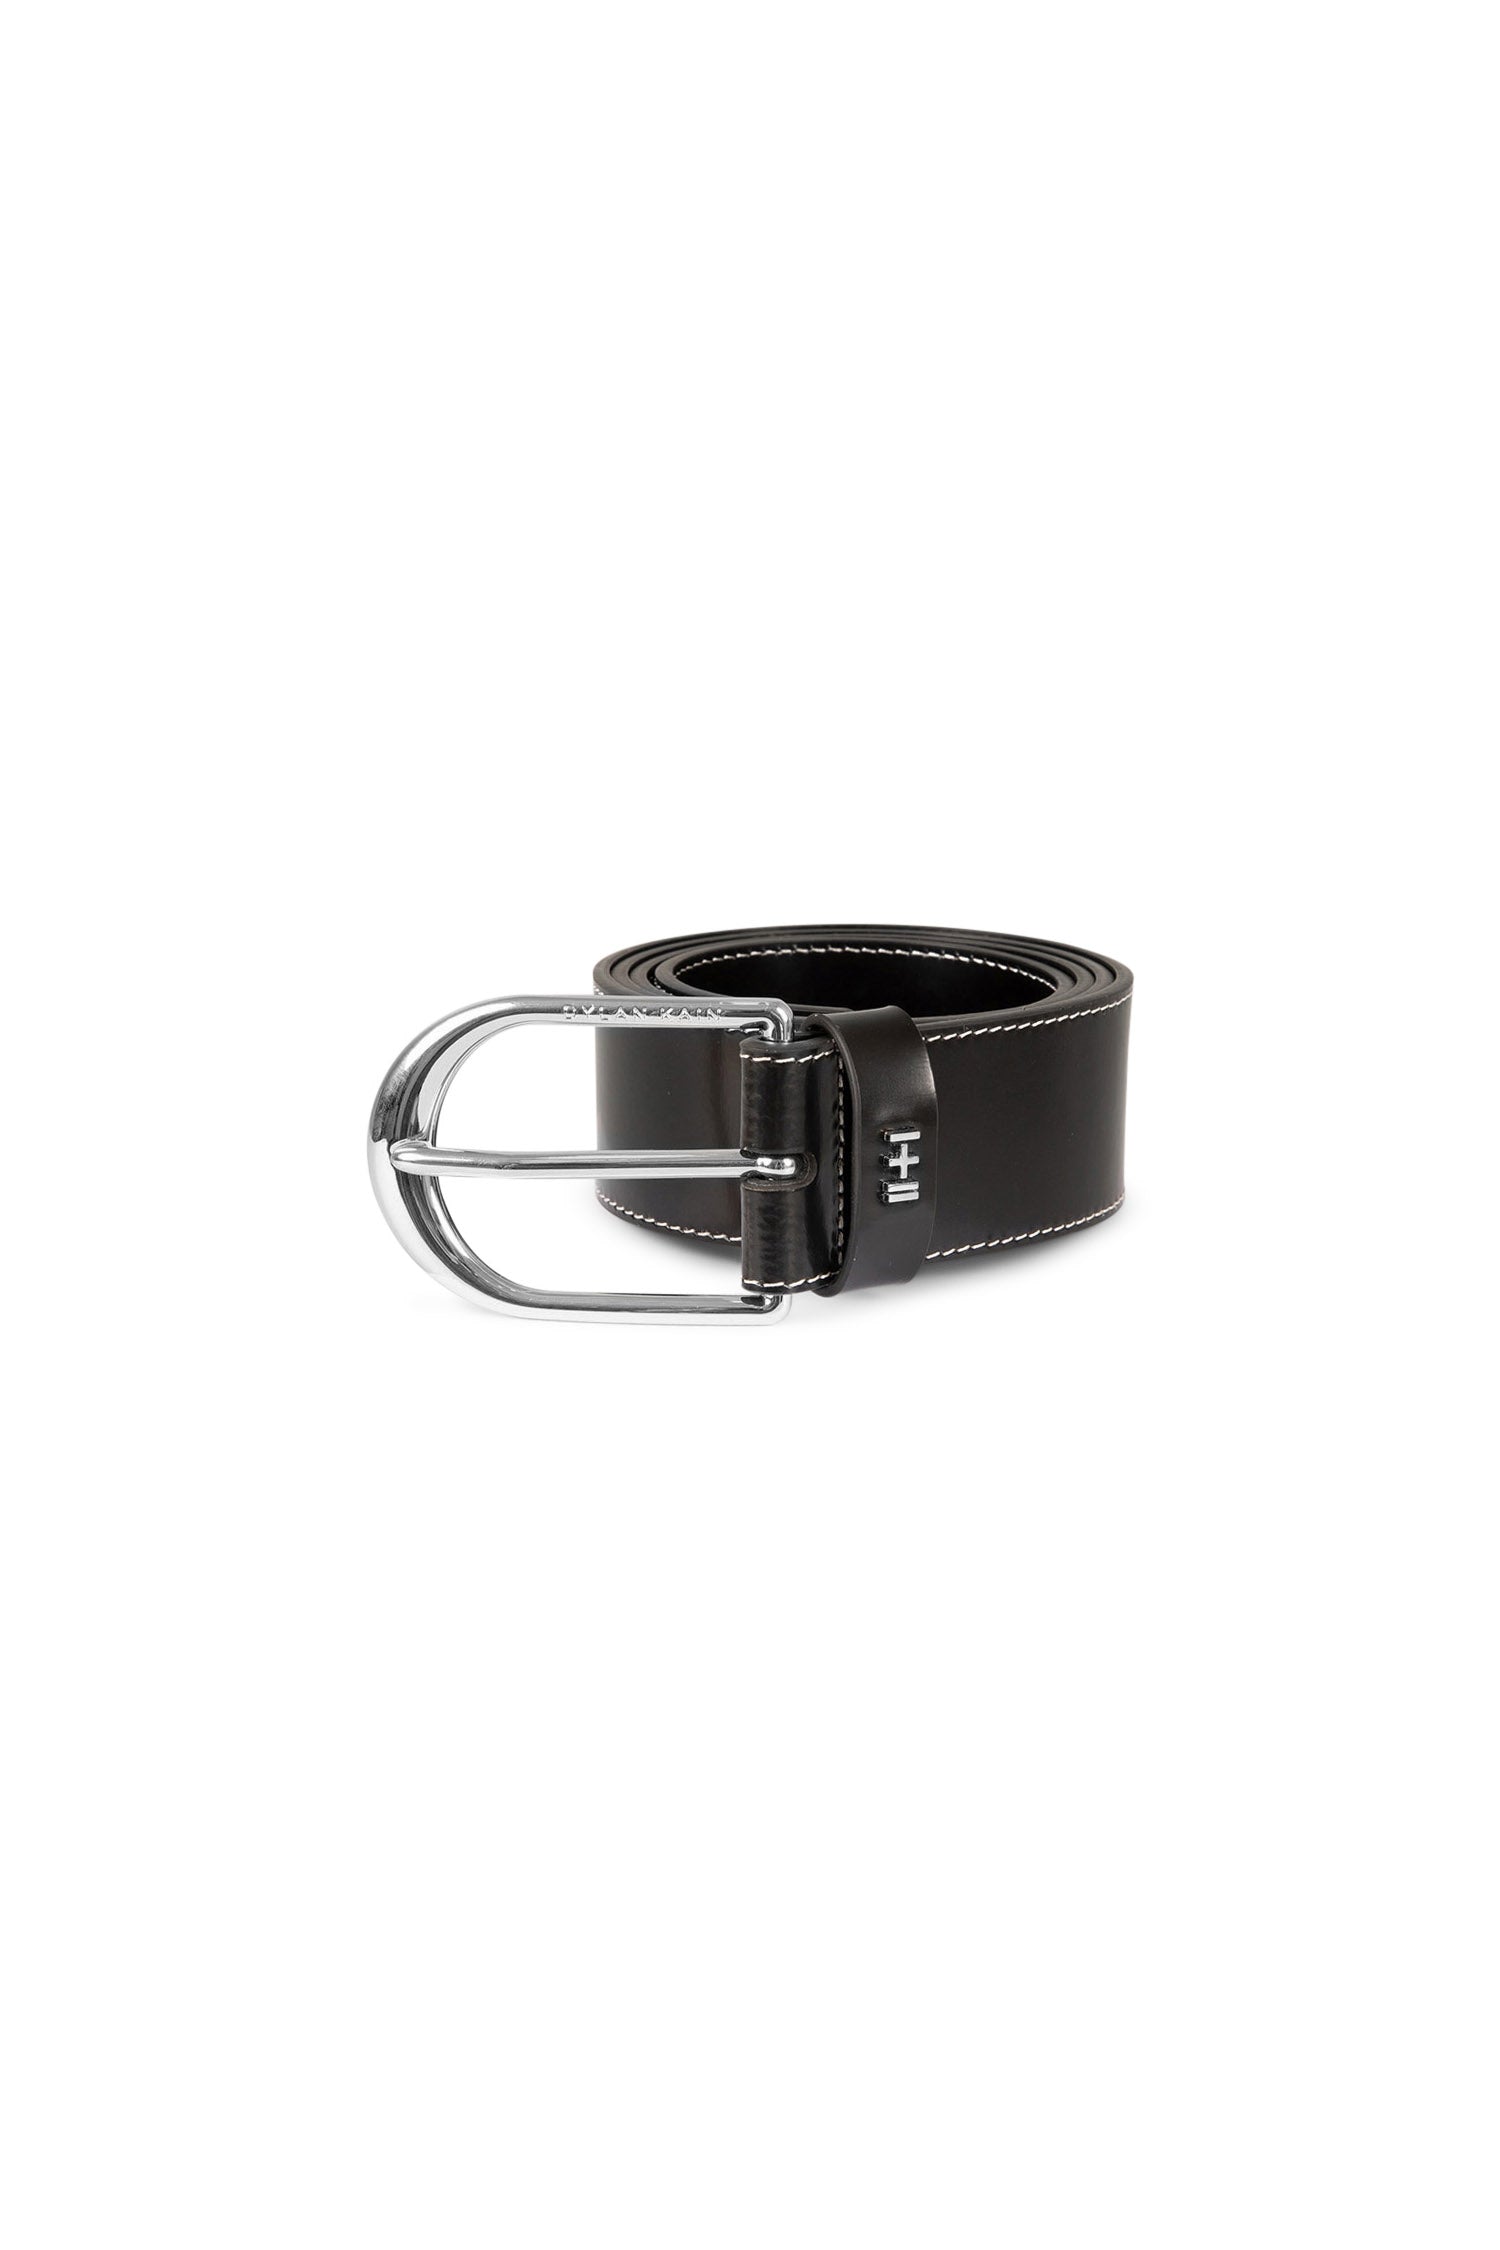 The Nika Lux Belt Silver - Gift Edit